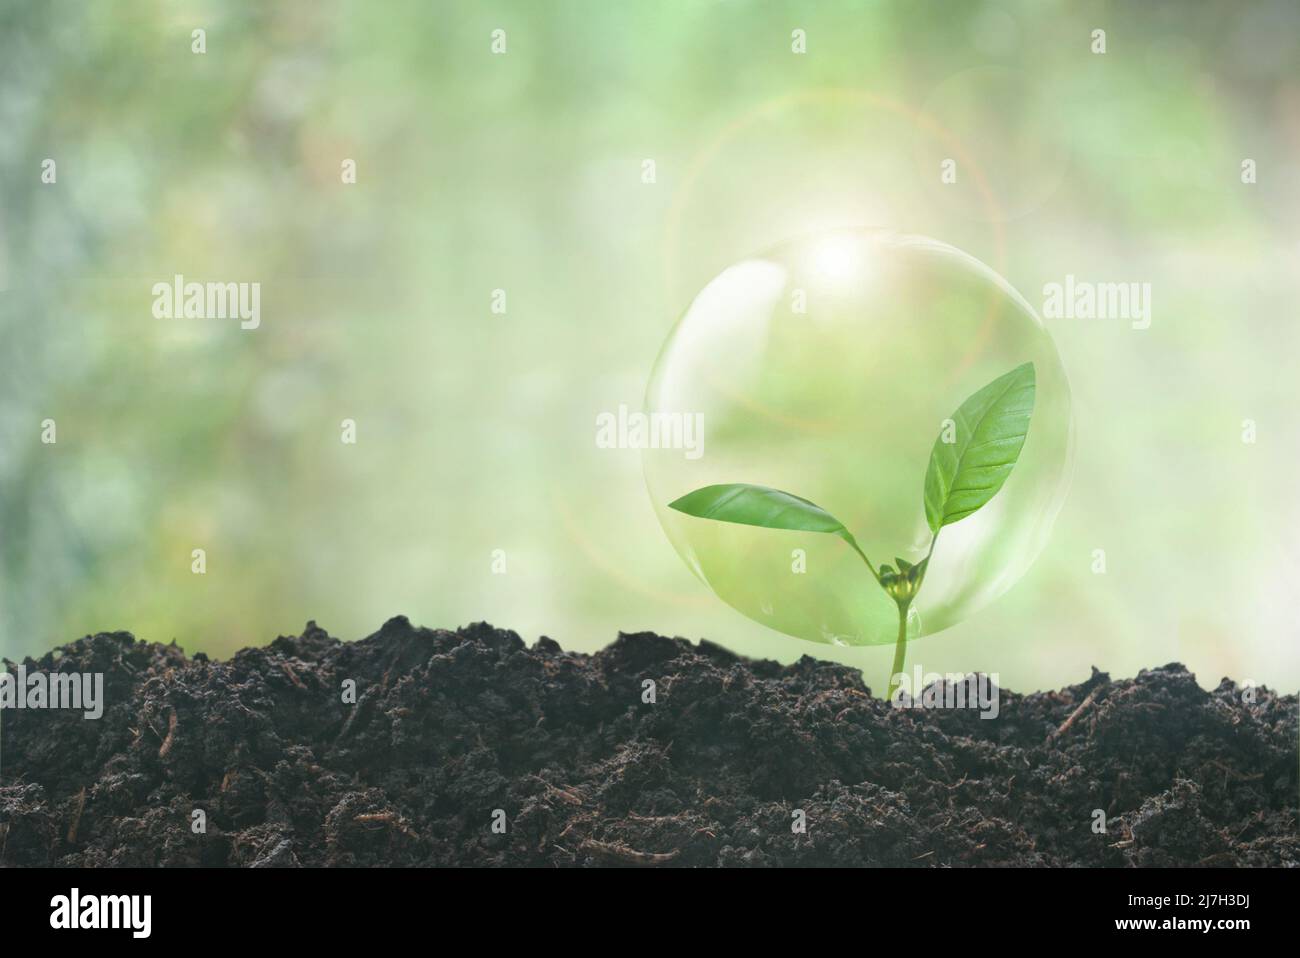 Seedling inside a protective sphere, growth, renewable sustainable energy concept Stock Photo